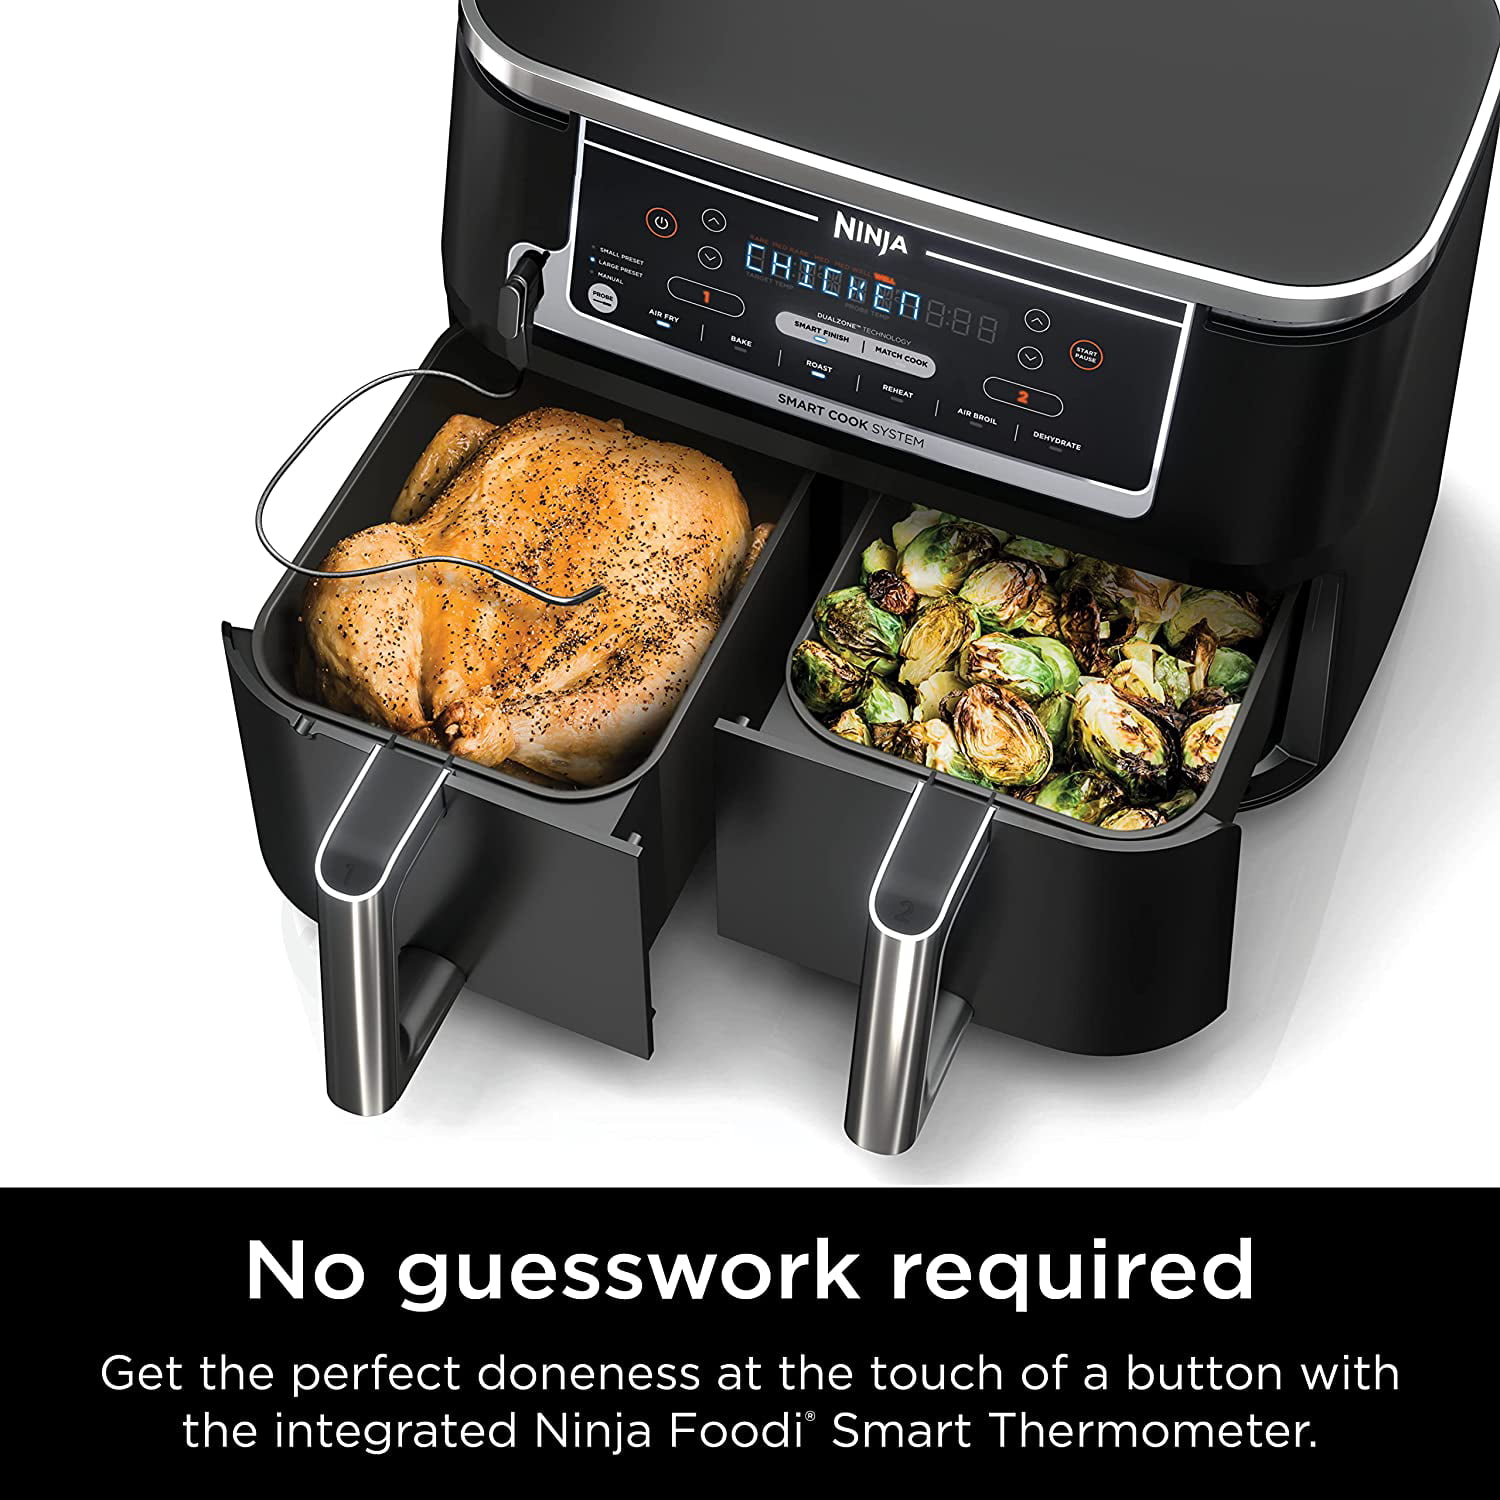  Ninja DZ550 Foodi 10 Quart 6-in-1 DualZone Smart XL Air Fryer  with 2 Independent Baskets, Smart Cook Thermometer for Perfect Doneness,  Match Cook & Smart Finish to Roast, Dehydrate & More